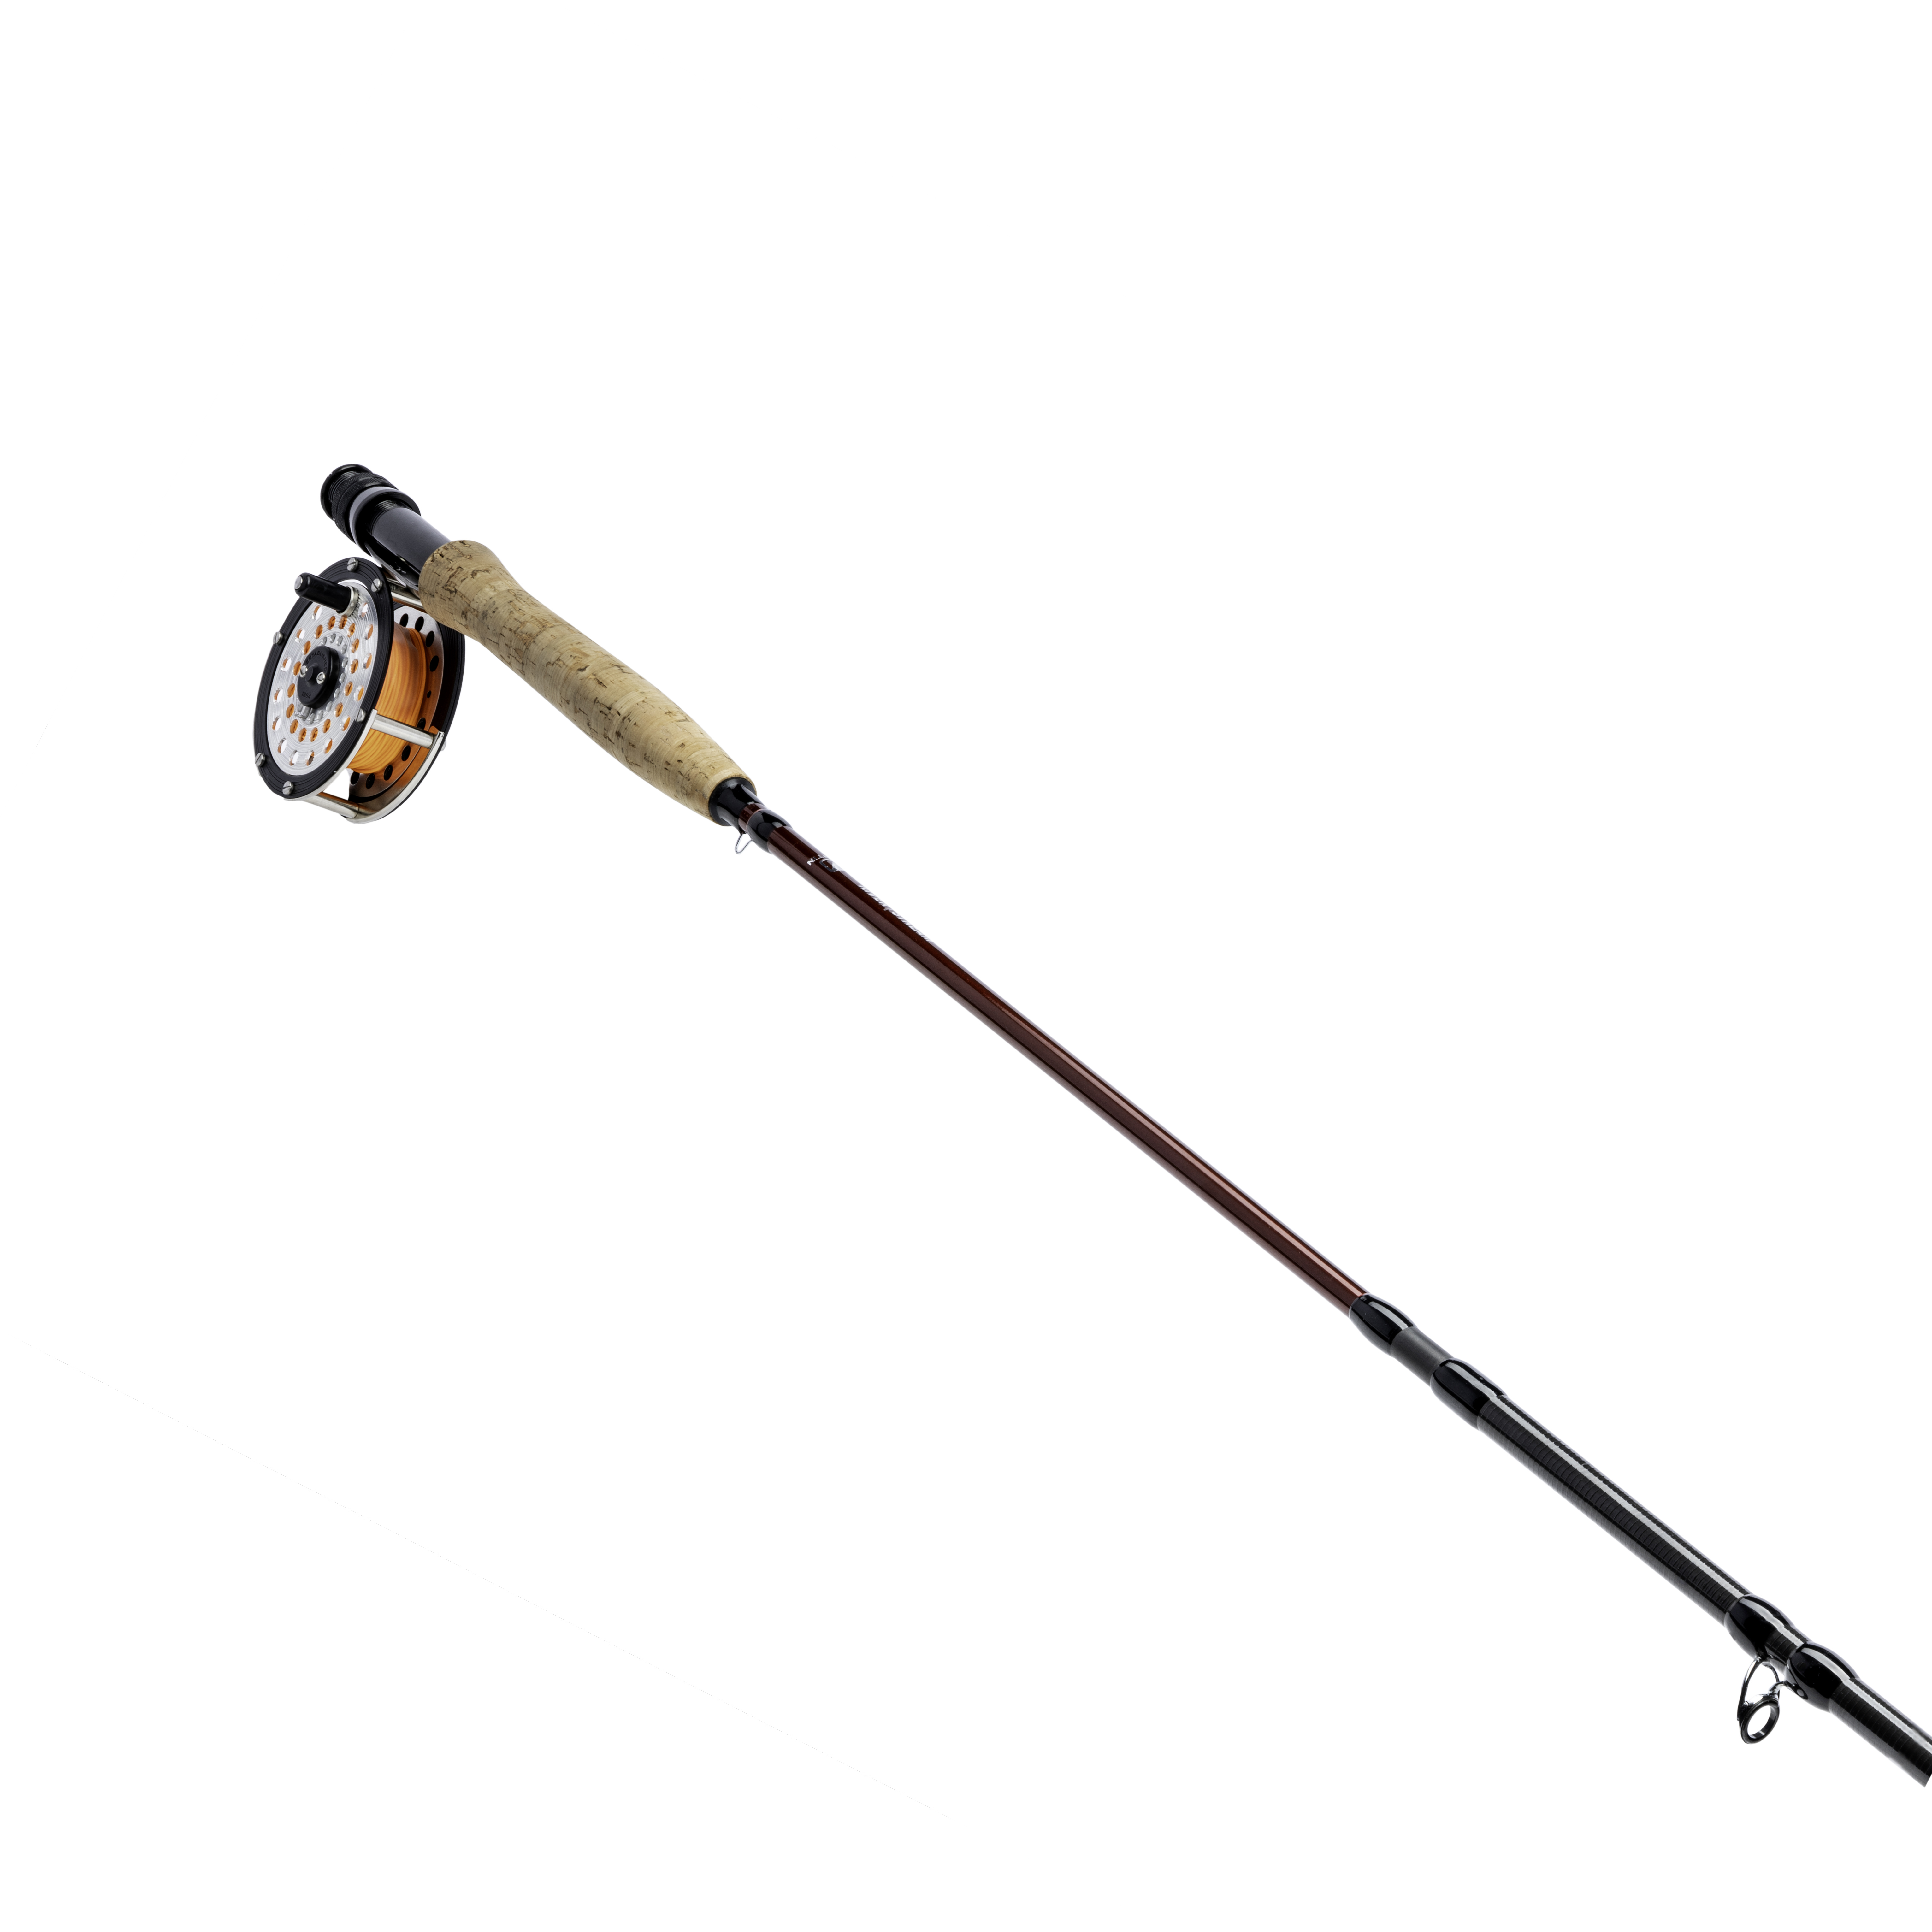 Berkley fishing poles a once popular brand goes the way of Zebco